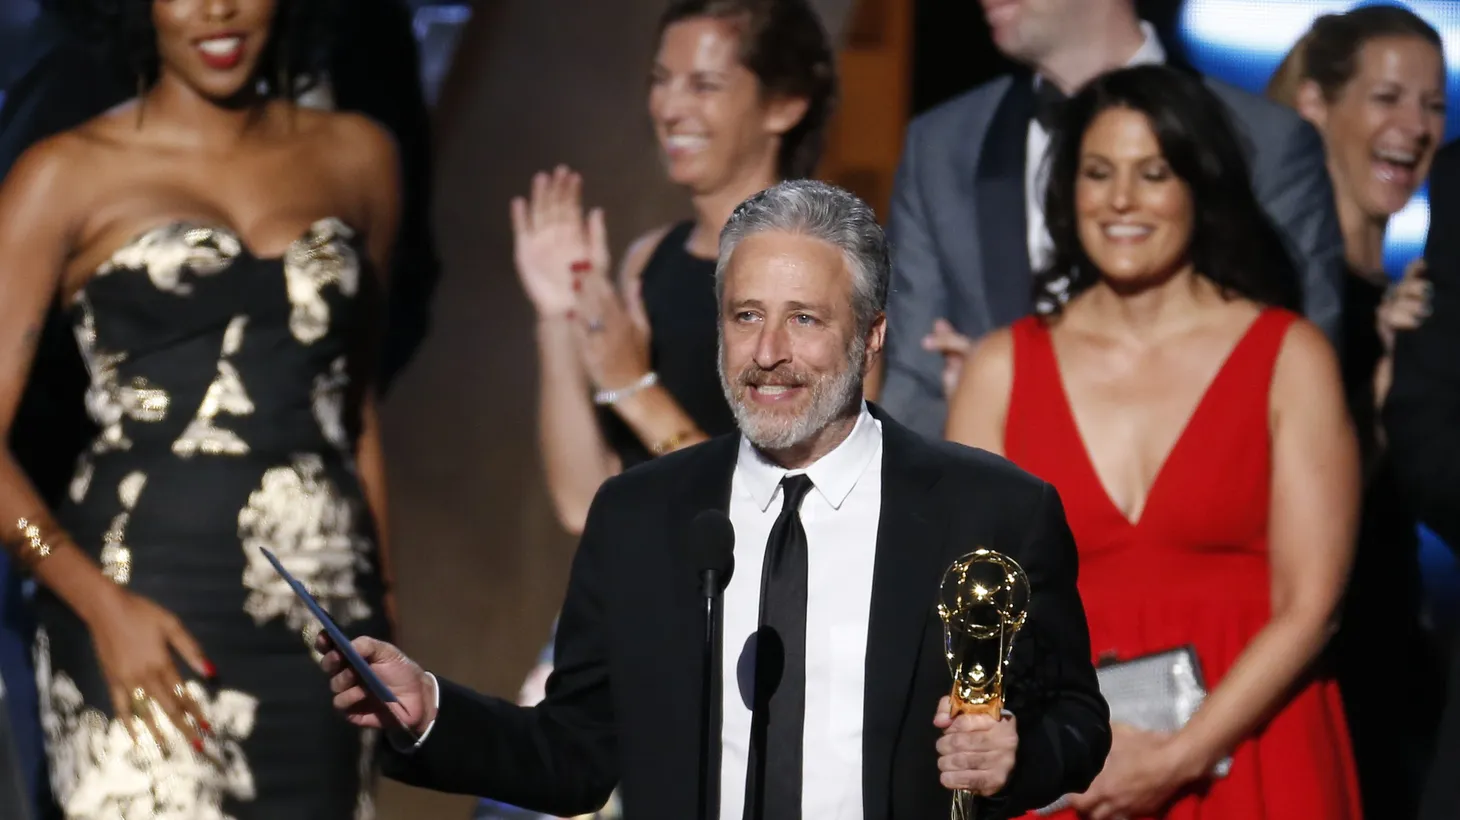 Jon Stewart accepts the award for Outstanding Variety Talk Series for Comedy Central's "The Daily Show with Jon Stewart" at the 67th Primetime Emmy Awards in Los Angeles, California September 20, 2015